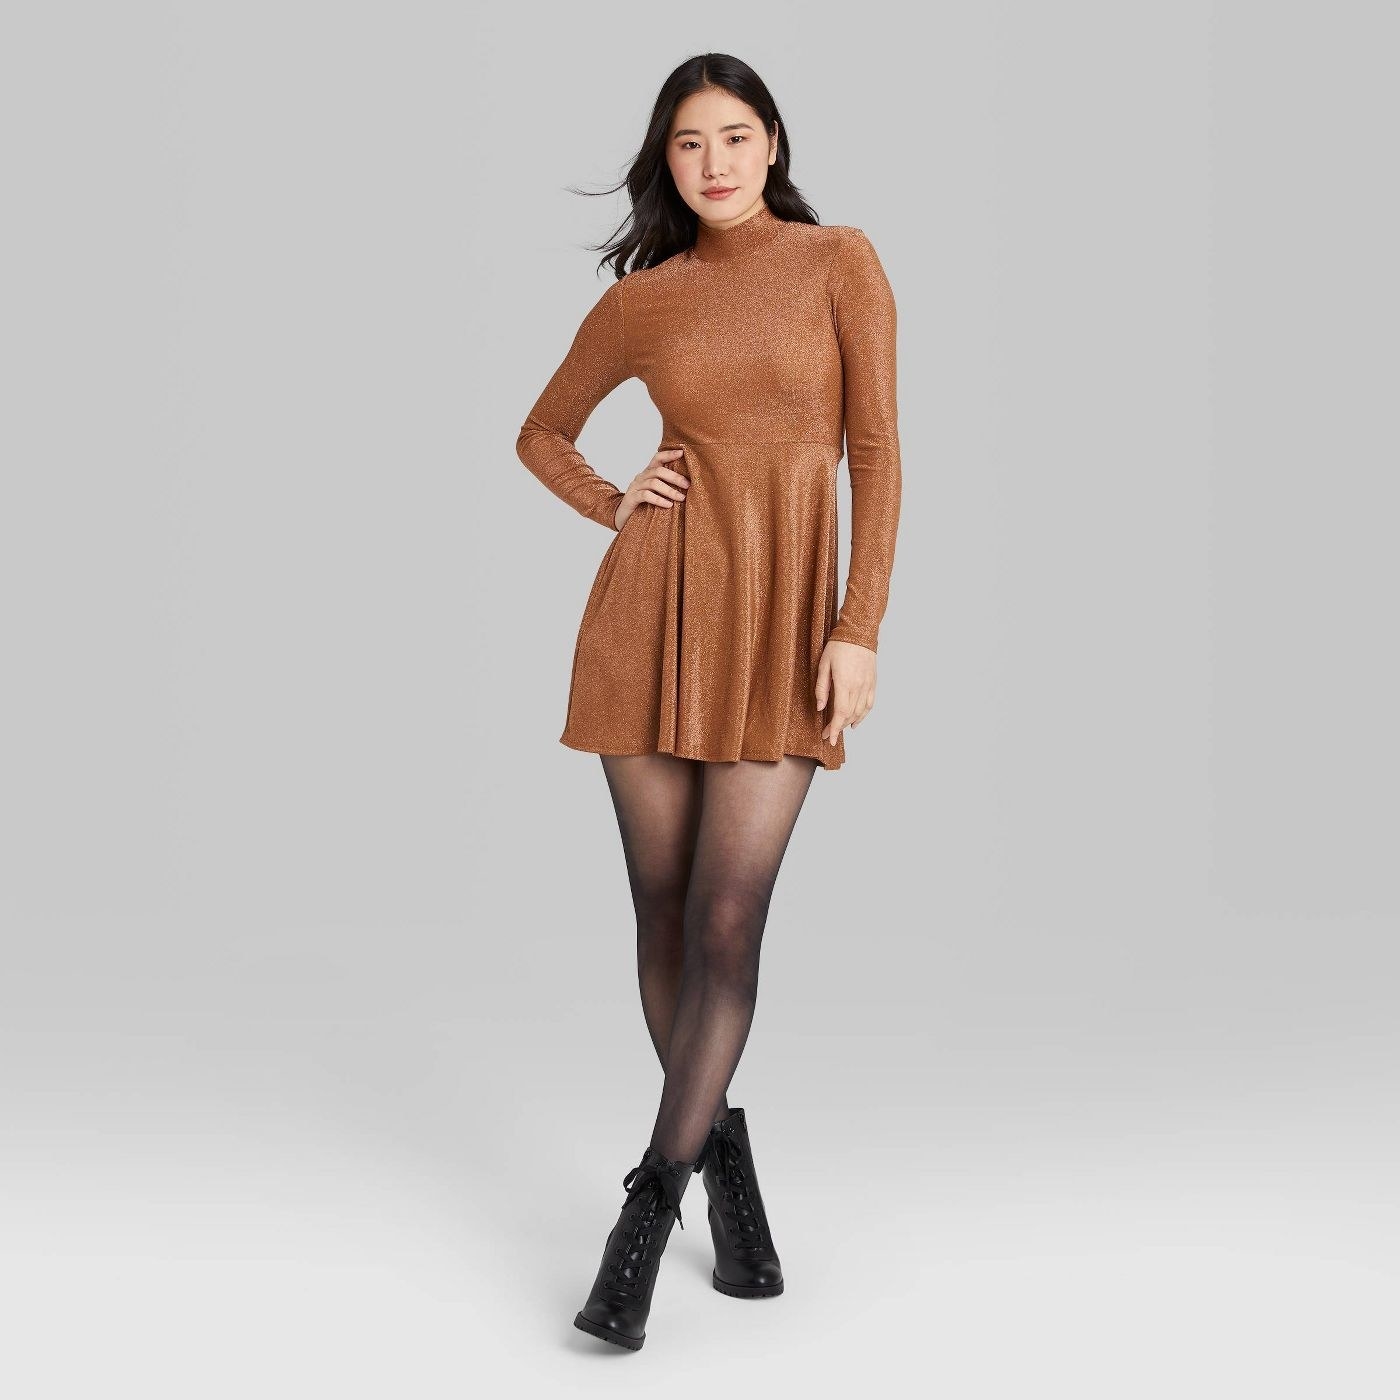 a model wearing the copper sparkly dress with black tights and black boots